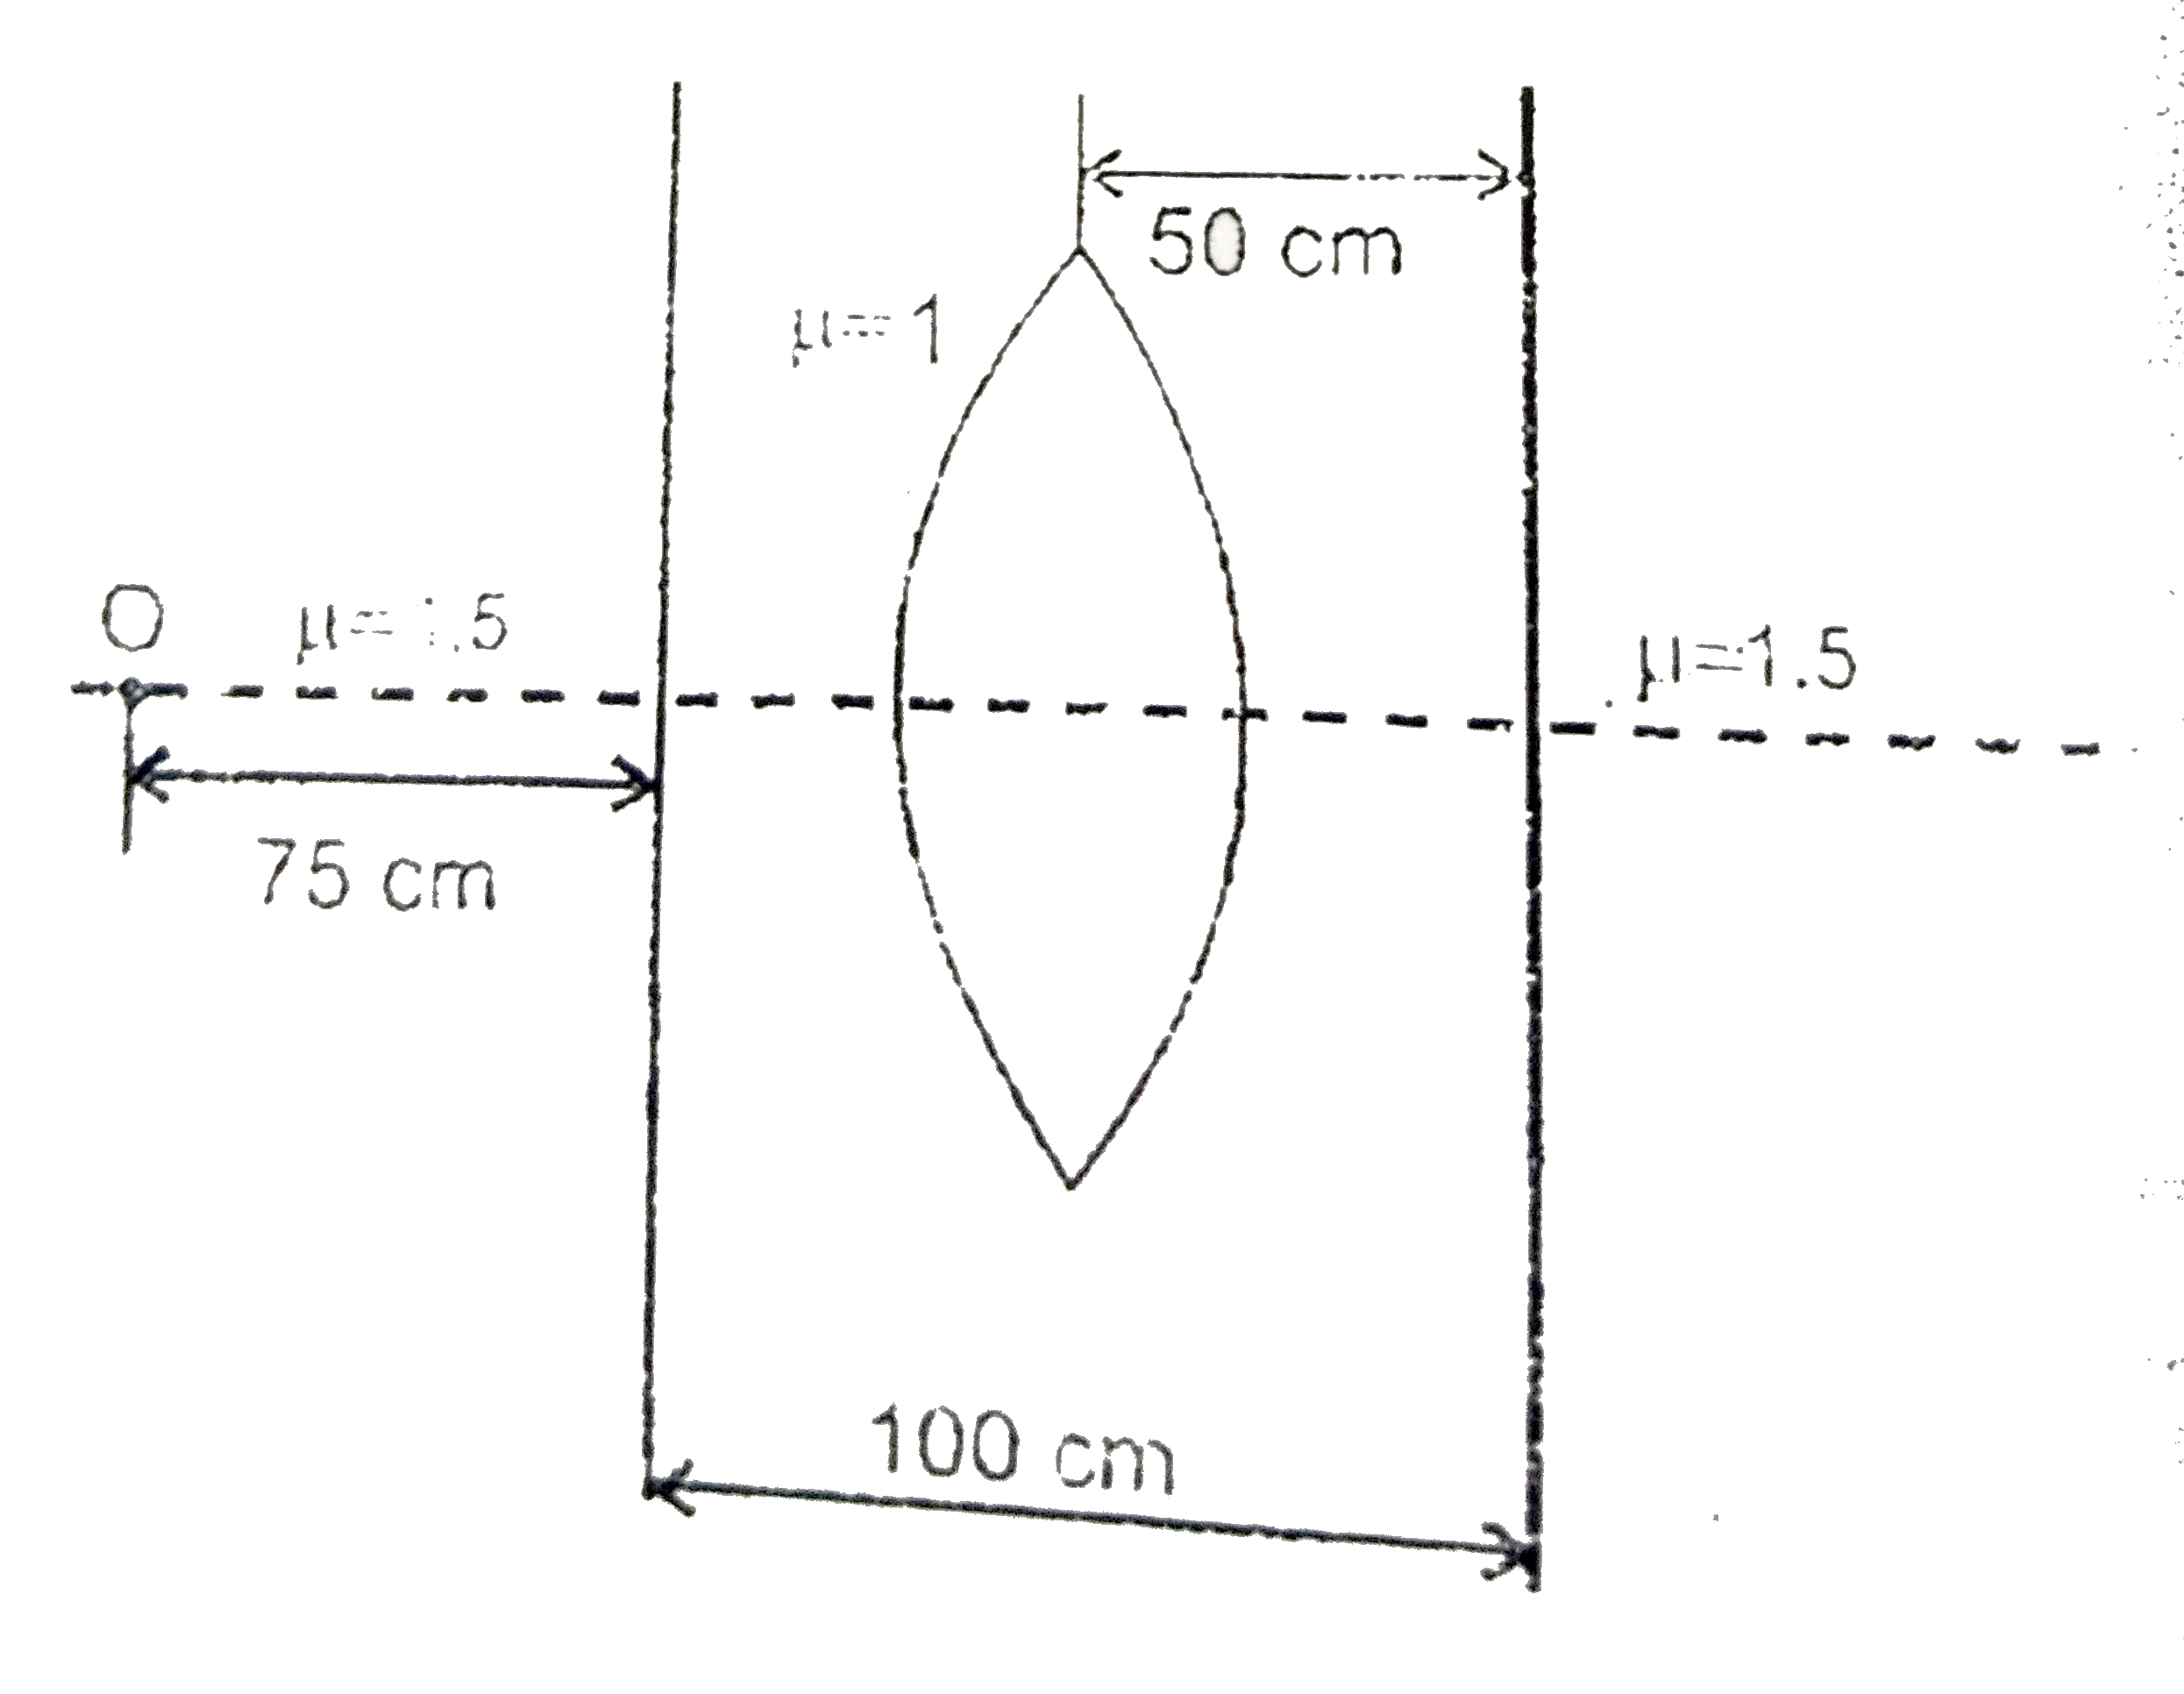 Two media each of refractive index 1.5 with plane parallel boundaries are separated by 100 cm. A convex lens of focal length 60 cm is placed midway between them with its principal axis normal to the boundaries. A luminous point object O is placed in one medium on the lens at a distance 125 cm from it. Find the position of its image formed as a result of refraction through the system.